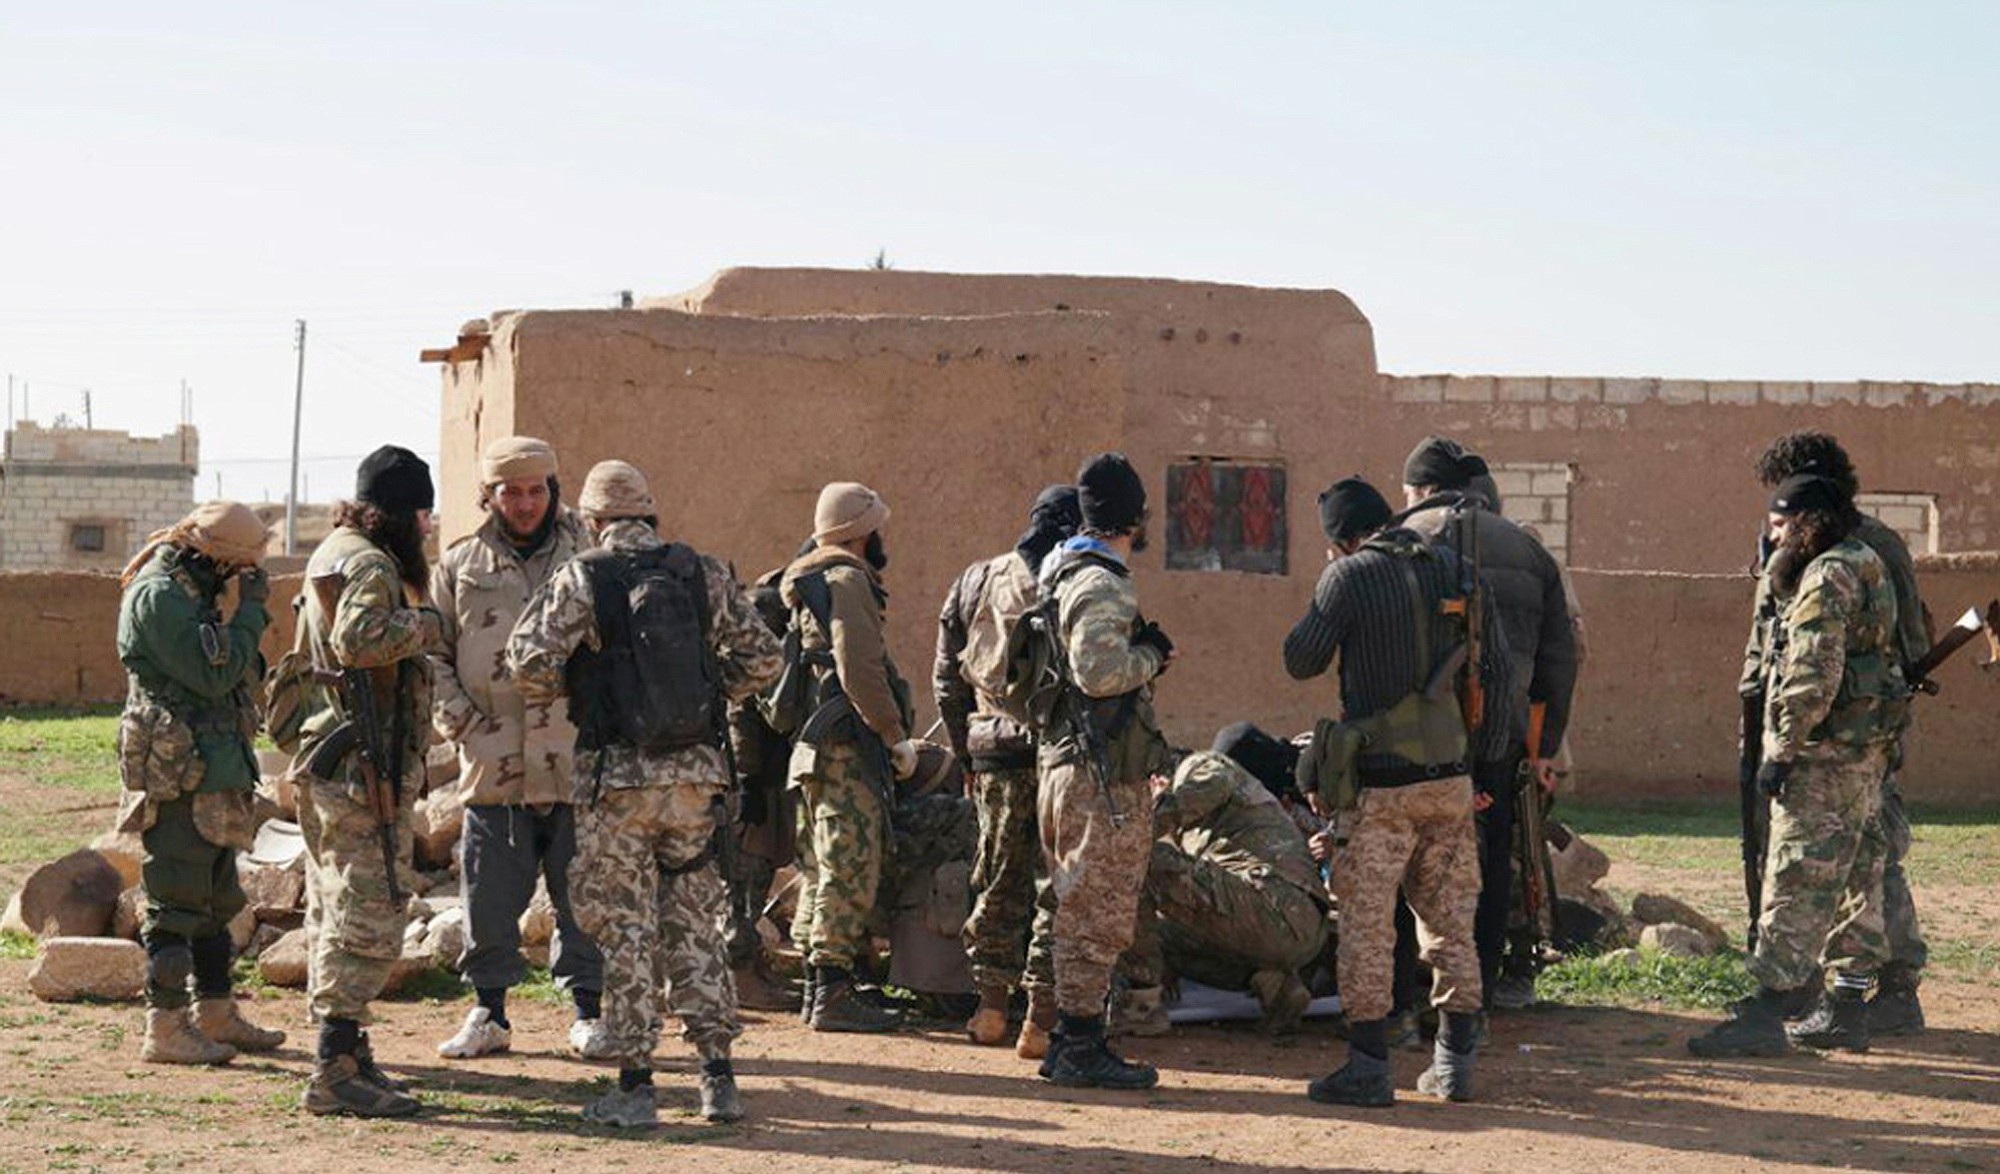 Militants take a break during fighting in Tal Tamr, Hassakeh province, Syria.